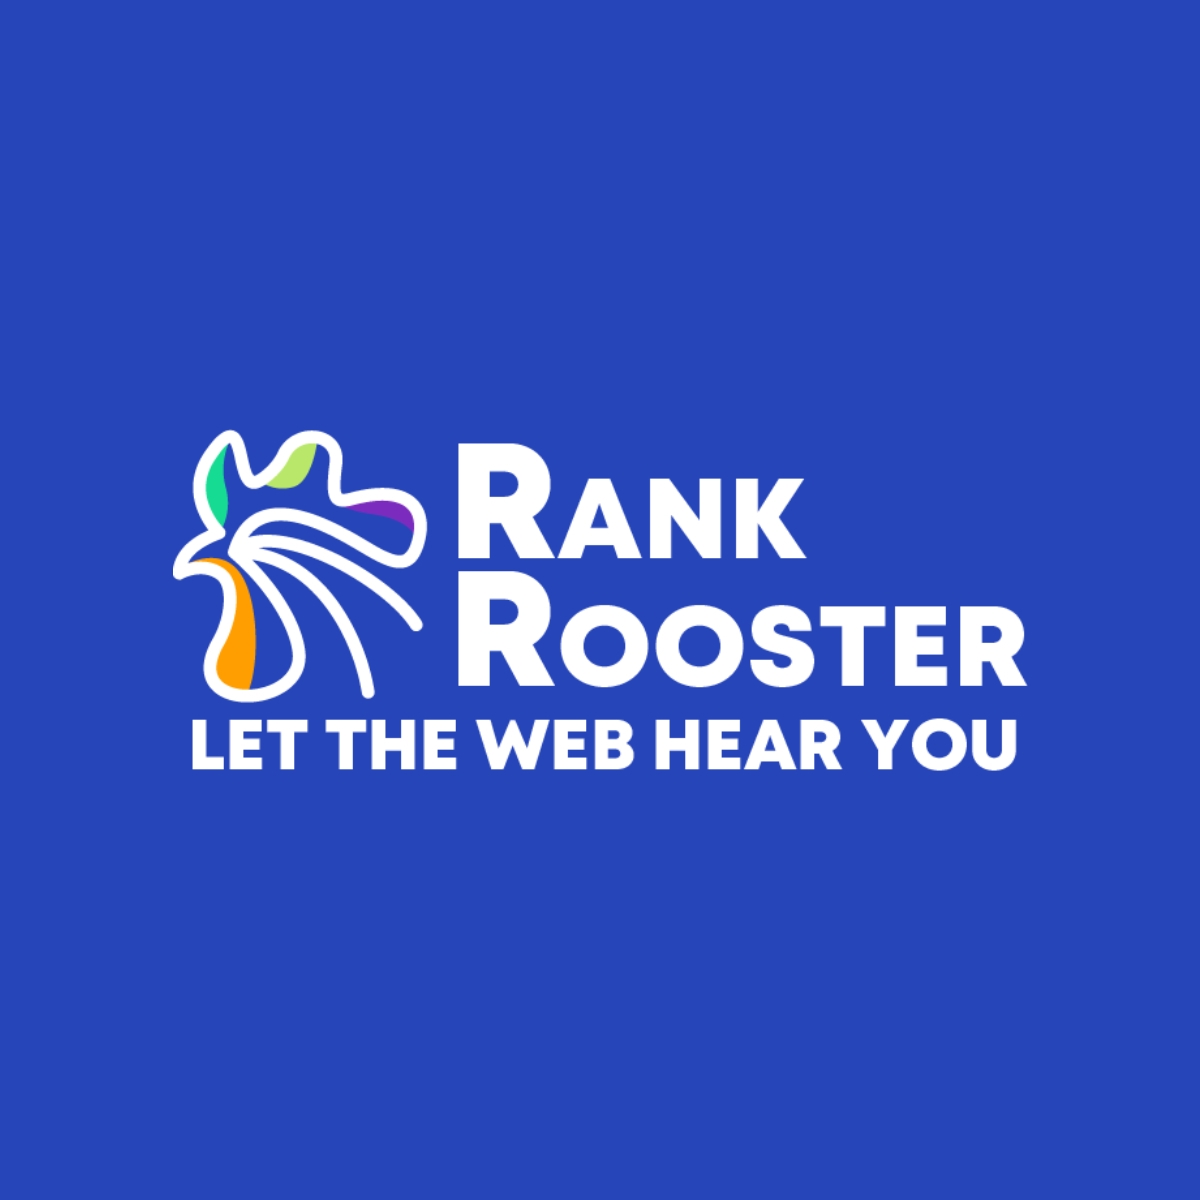 Rank Rooster - You Friendly SEO Agency